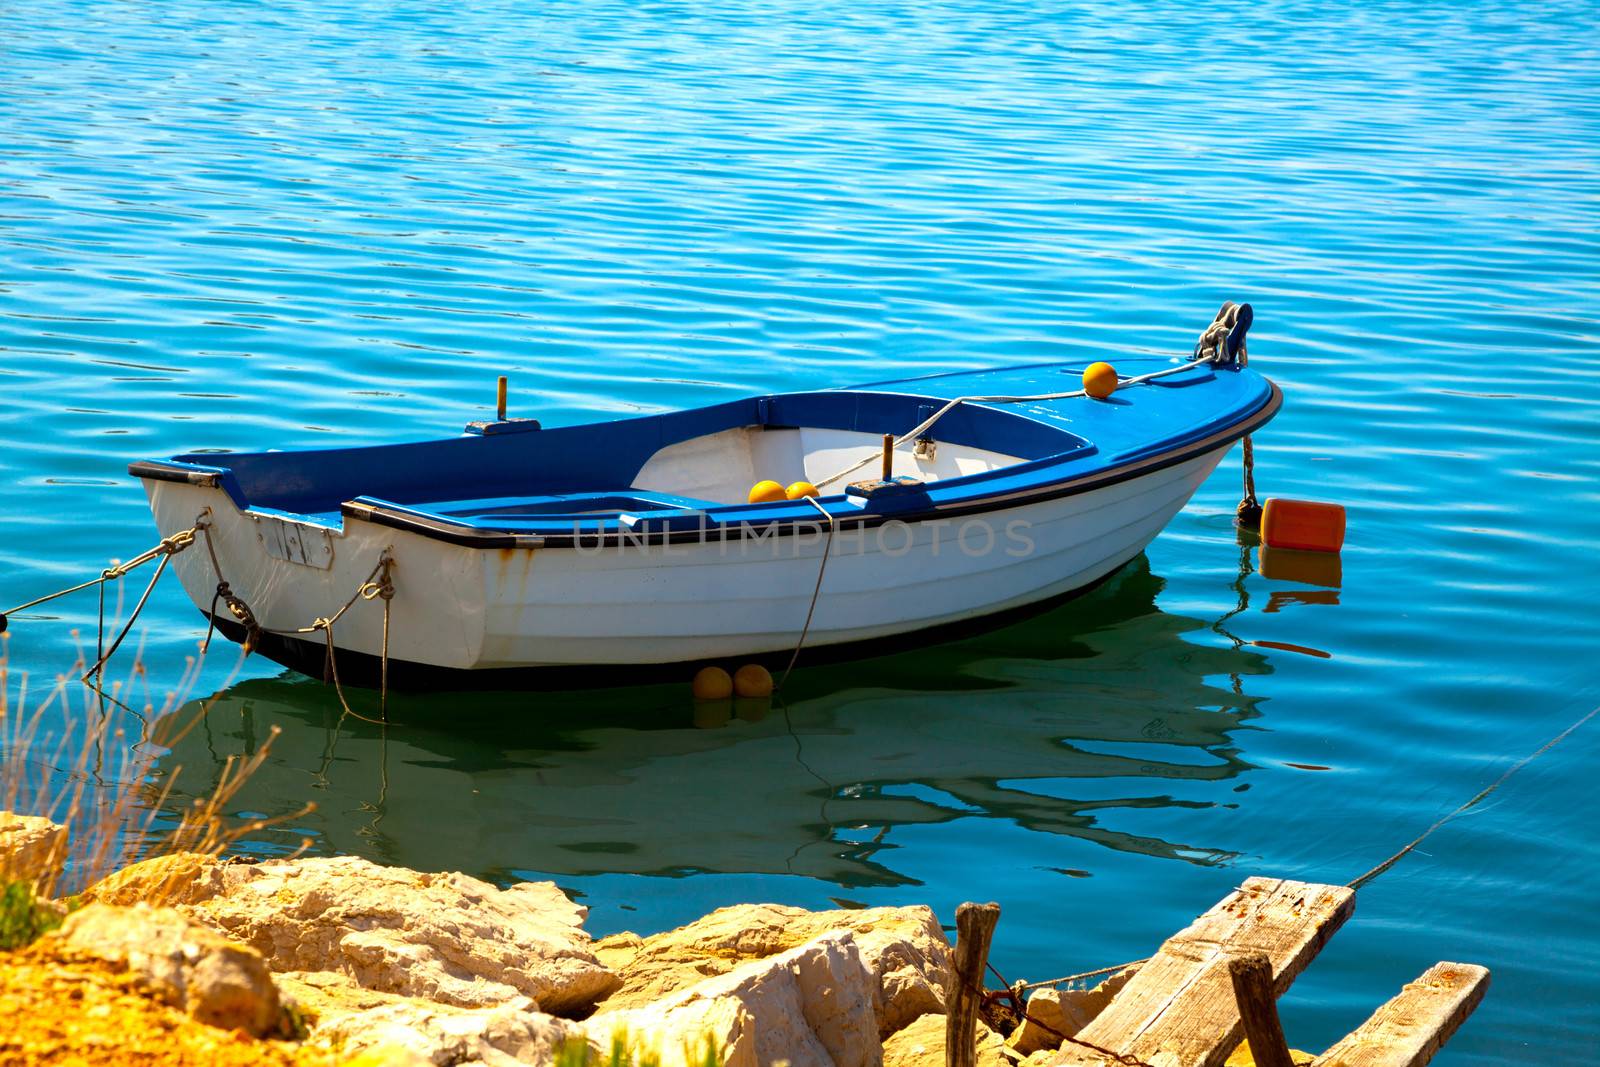 One fishing boat floating on the water